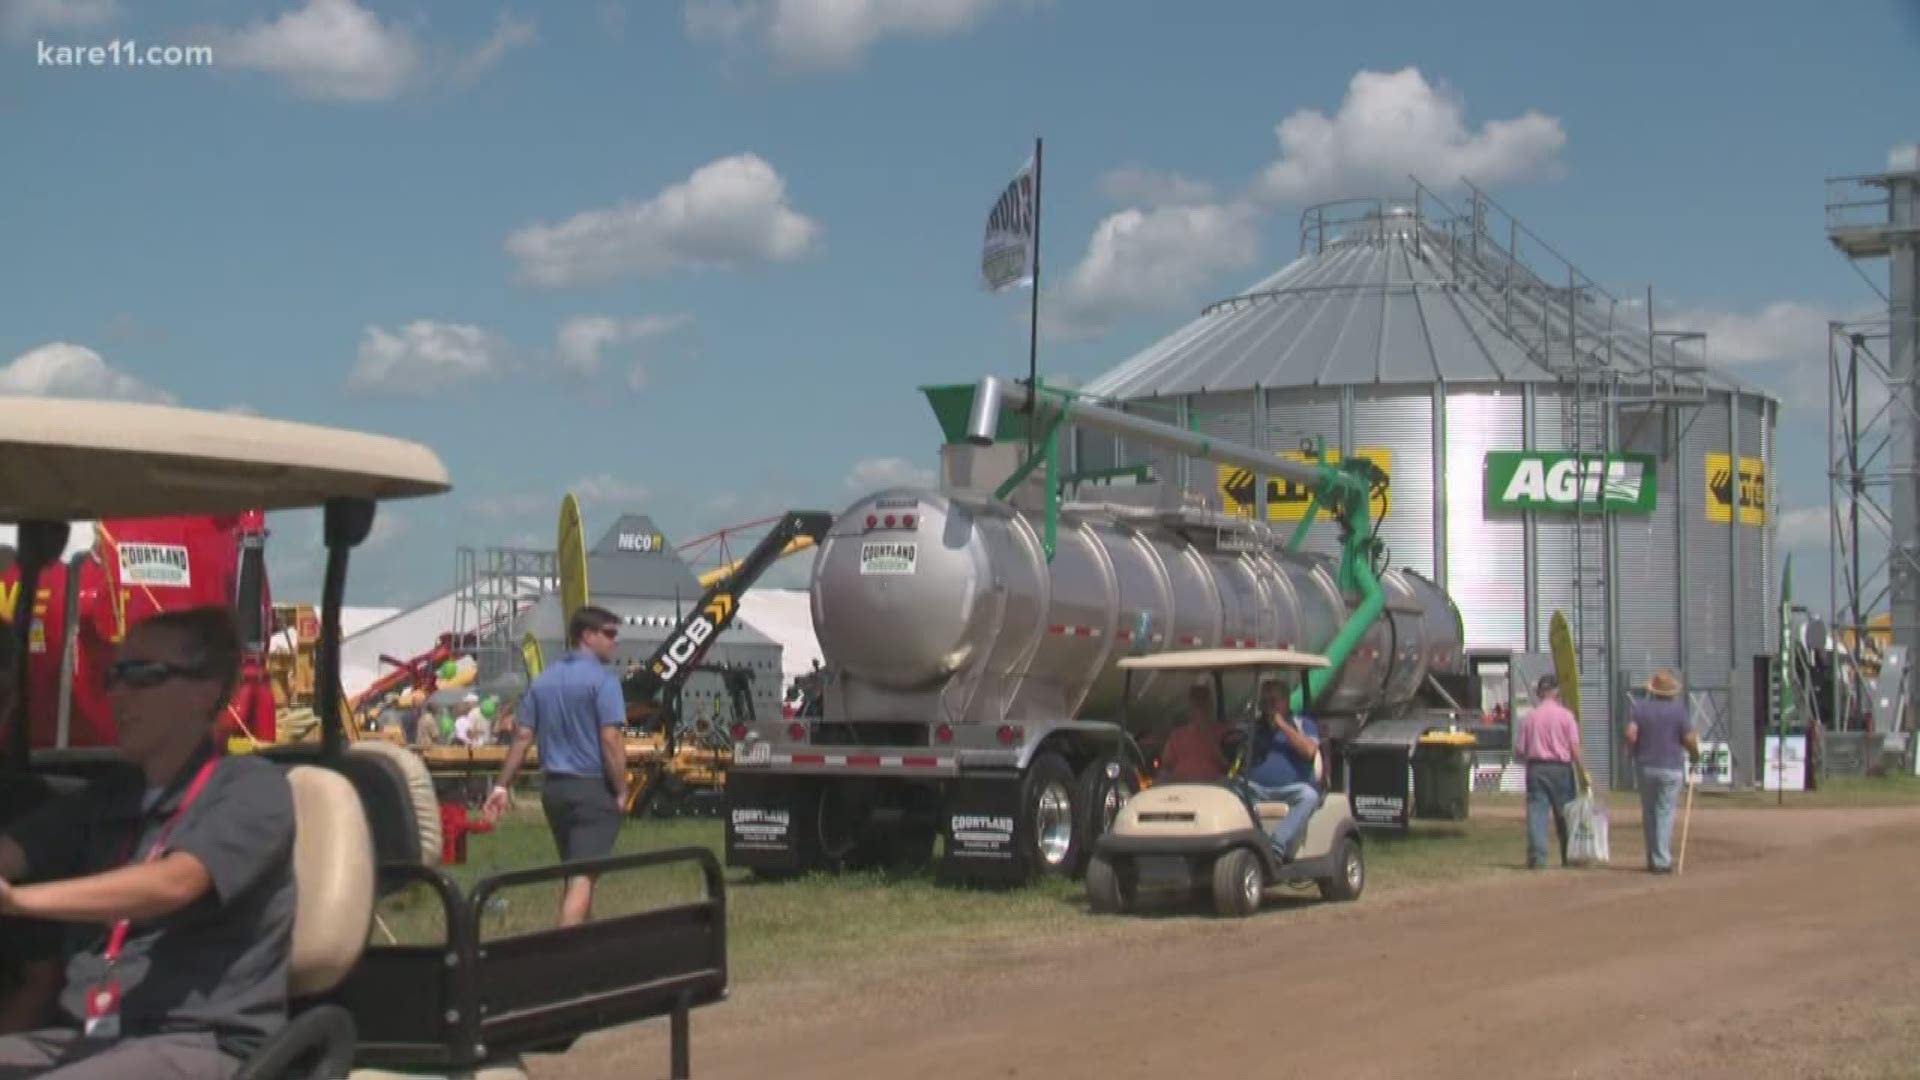 Farmers who gathered at the annual ag fair near Redwood Falls say they're running out of patience with ongoing uncertainty about exports to China.